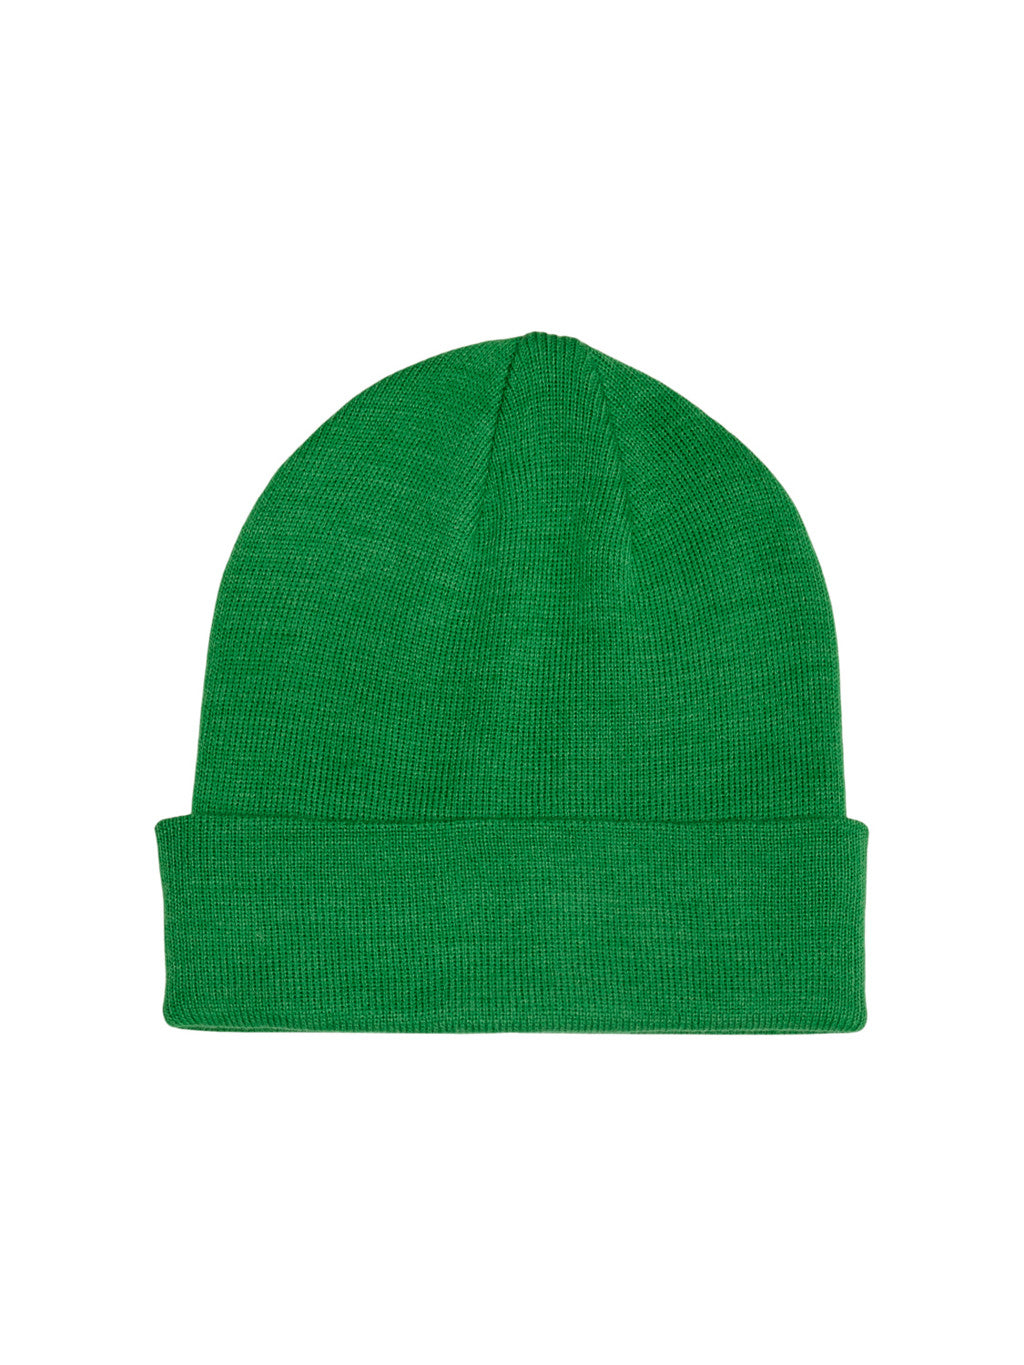 ONLY BASIC HATS ( 5 colors ) 